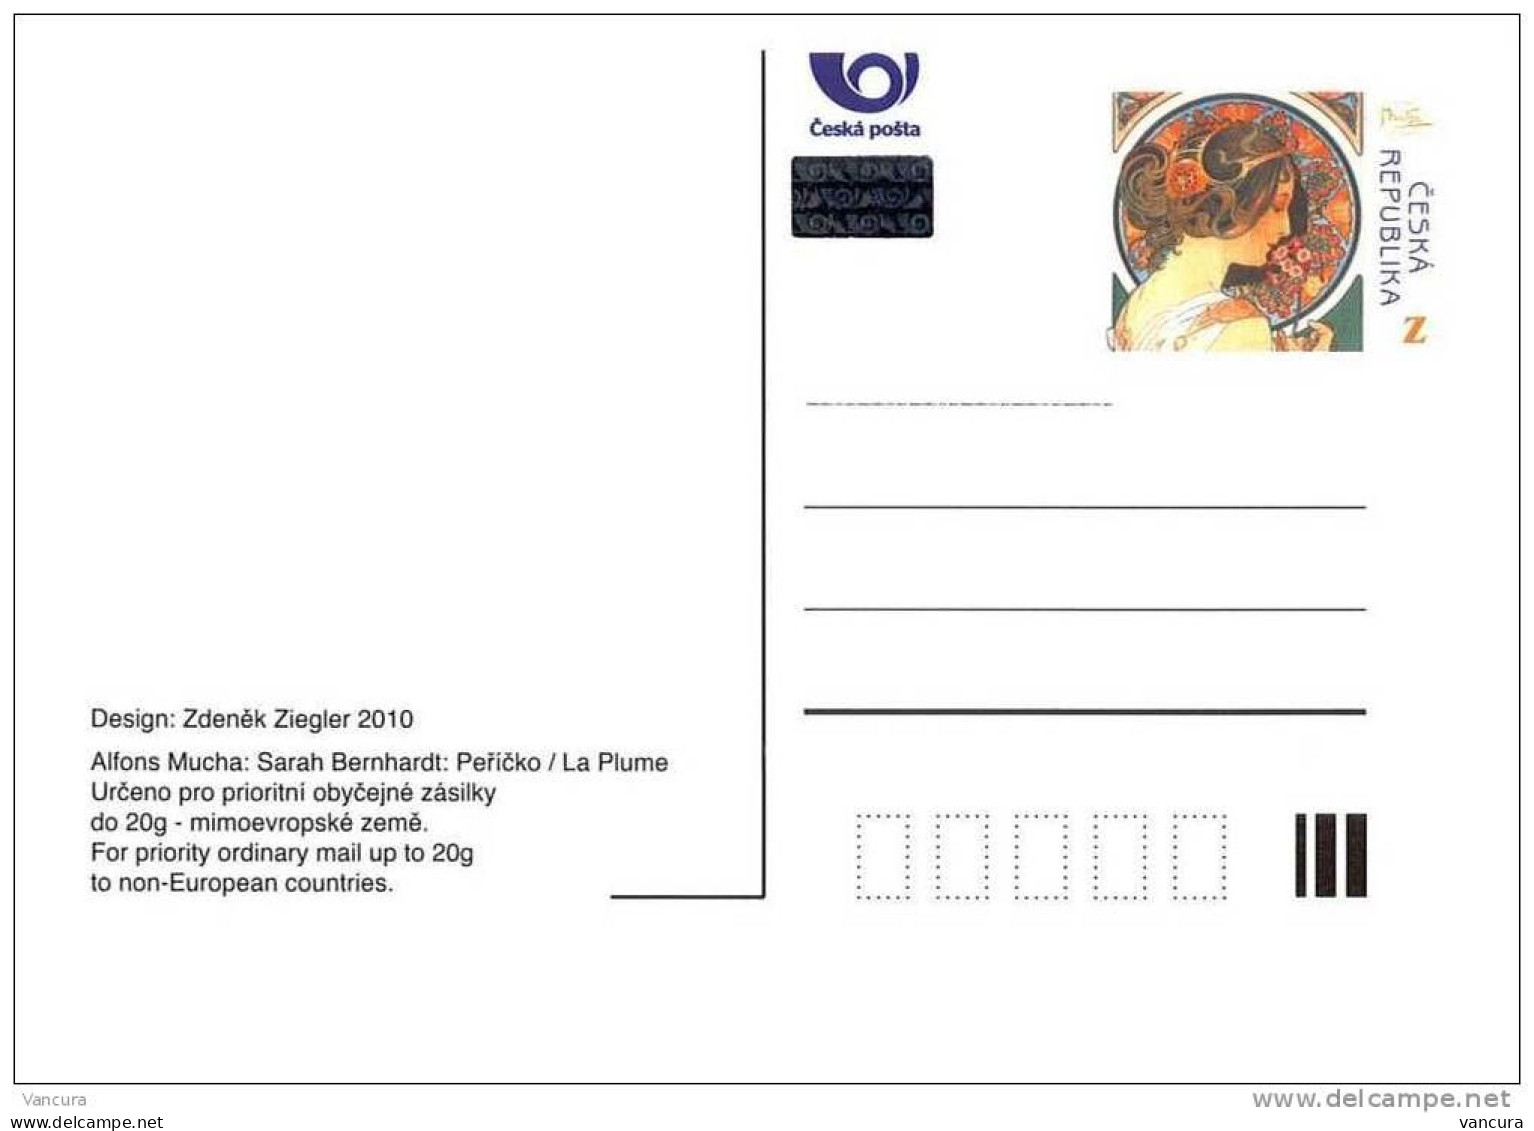 Card CPH 13 And 14 Czech Republic A. Mucha's Sarah Bernhardt In La Plume,and Morning Star 2010 - Cartes Postales